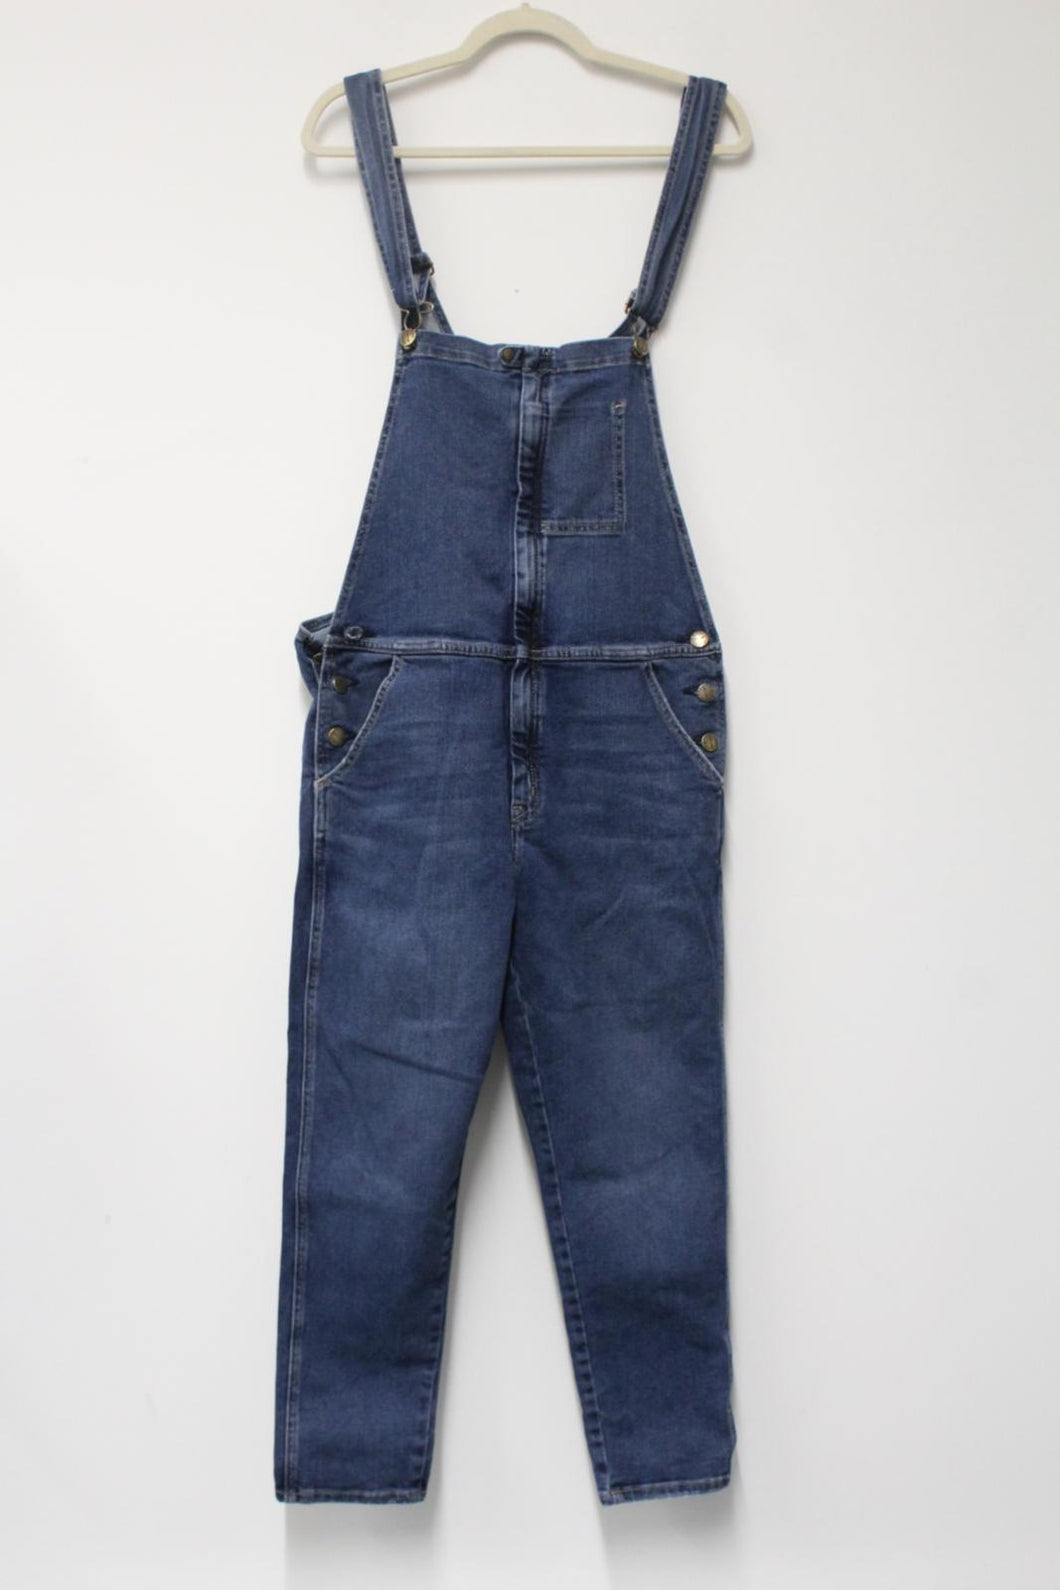 CURRENT/ELLIOTT Ladies Blue Denim The Ranch Hand Reese Overall Dungarees Size M NEW